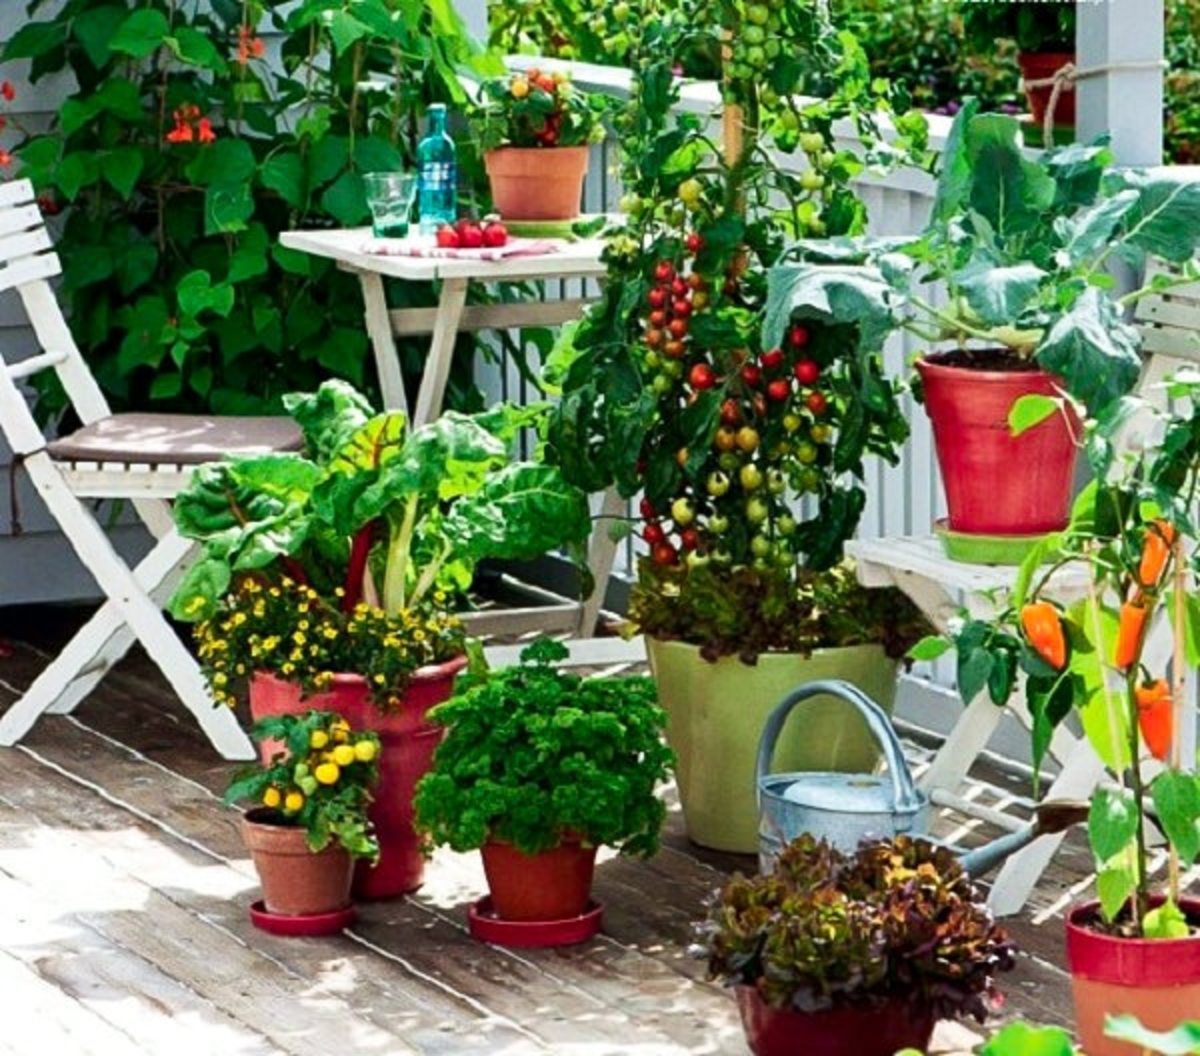 How to Utilize Your Balcony to Make a Small Kitchen Garden